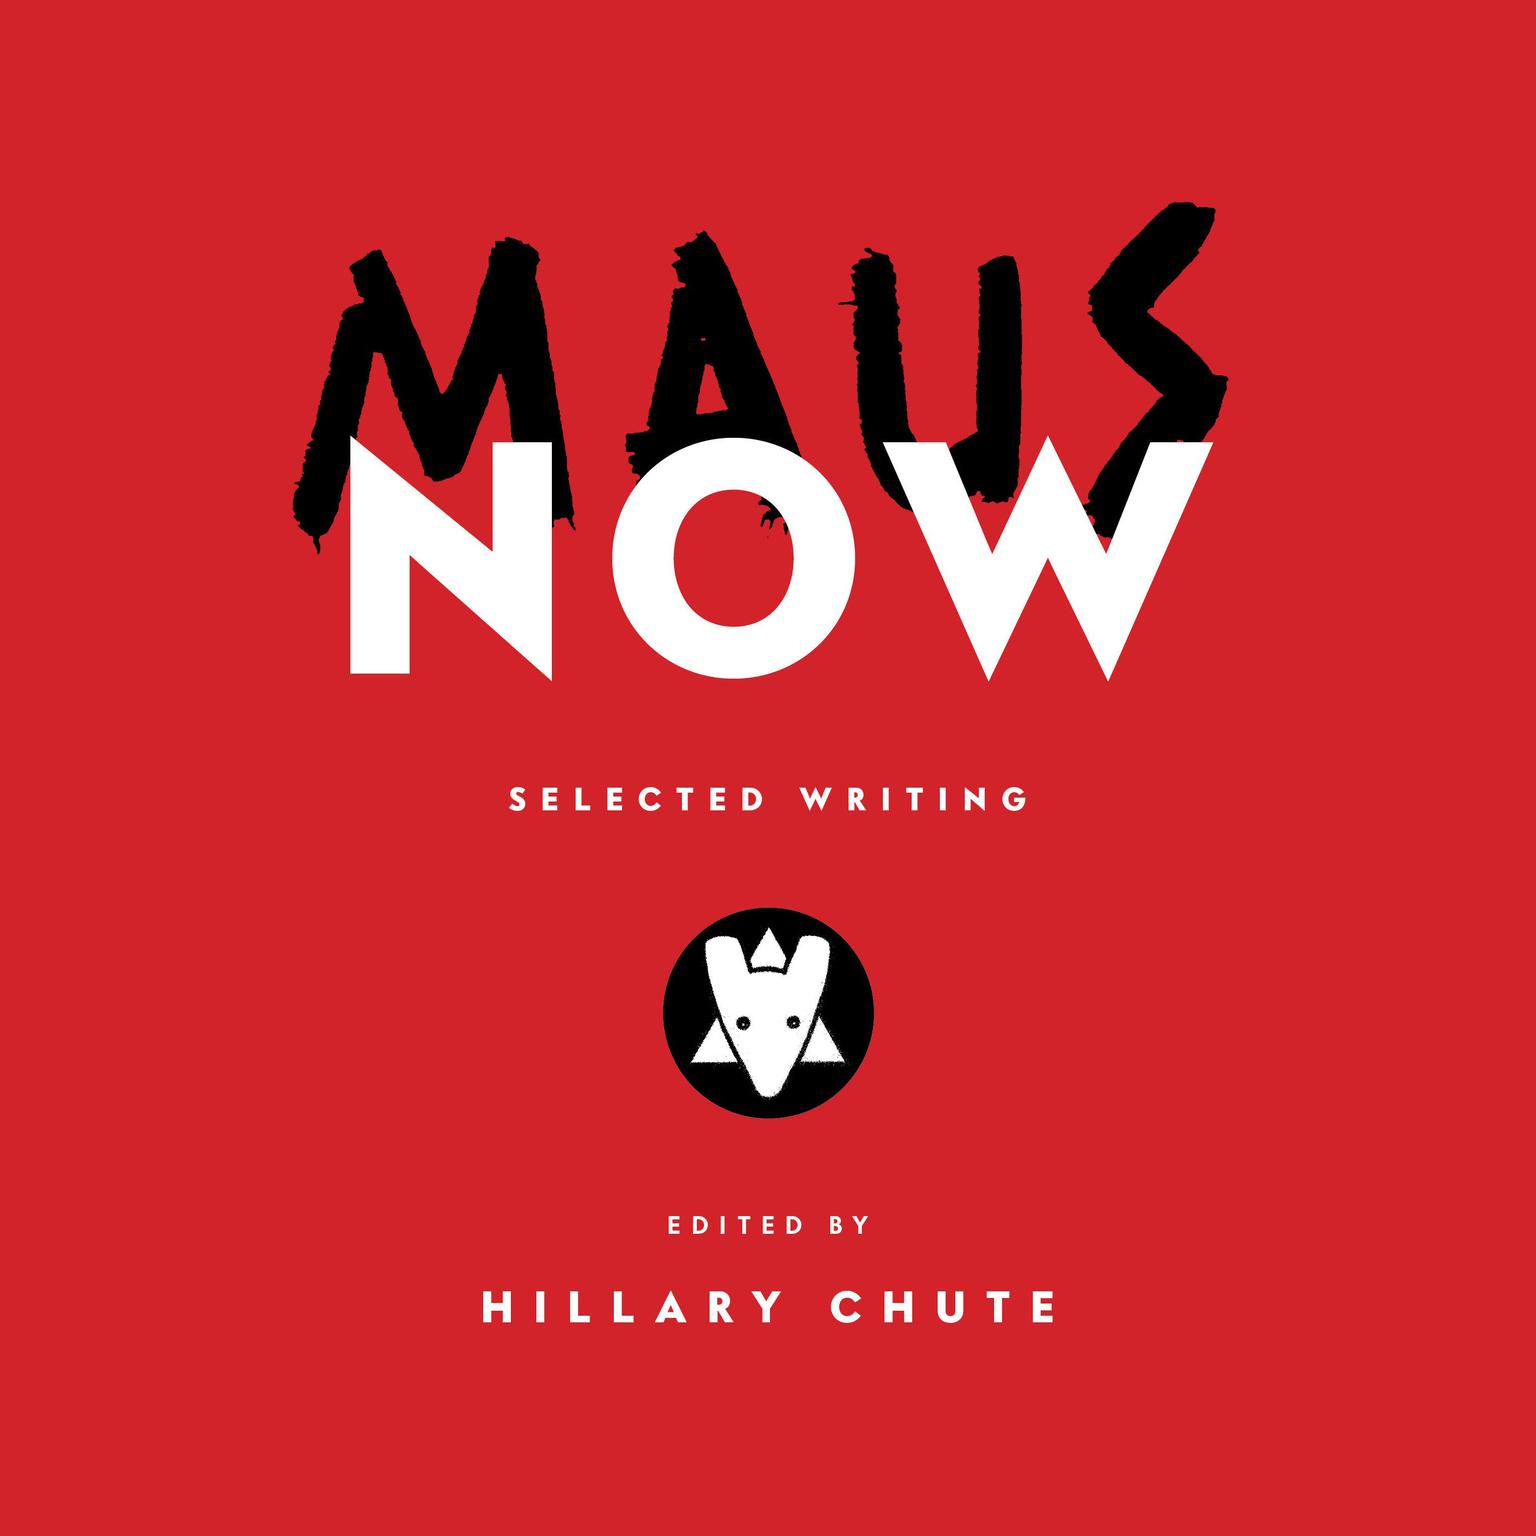 Maus Now: Selected Writing Audiobook, by Philip Pullman